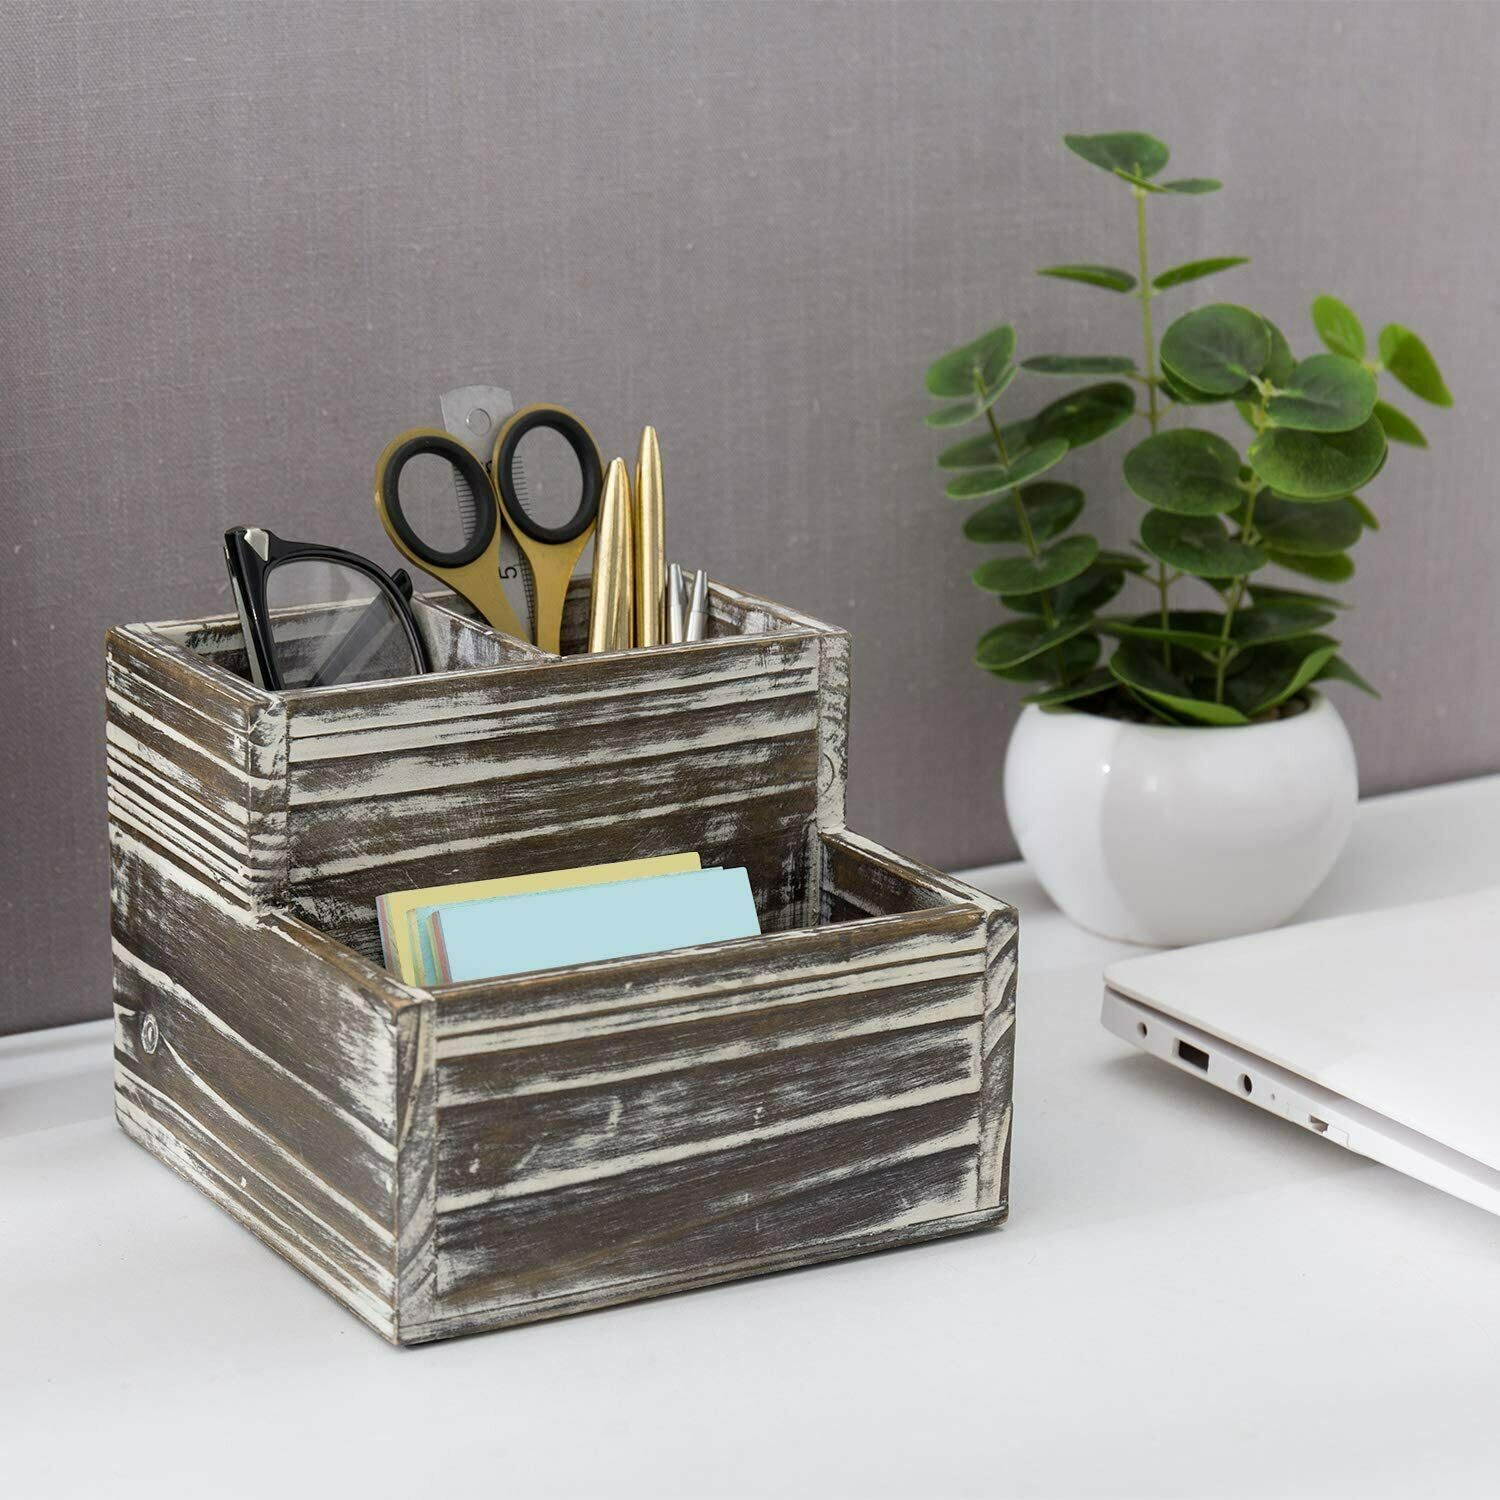 Rustic Torched Wood Table Top Home Office Desk Organizer Accessories Set  5-Piece